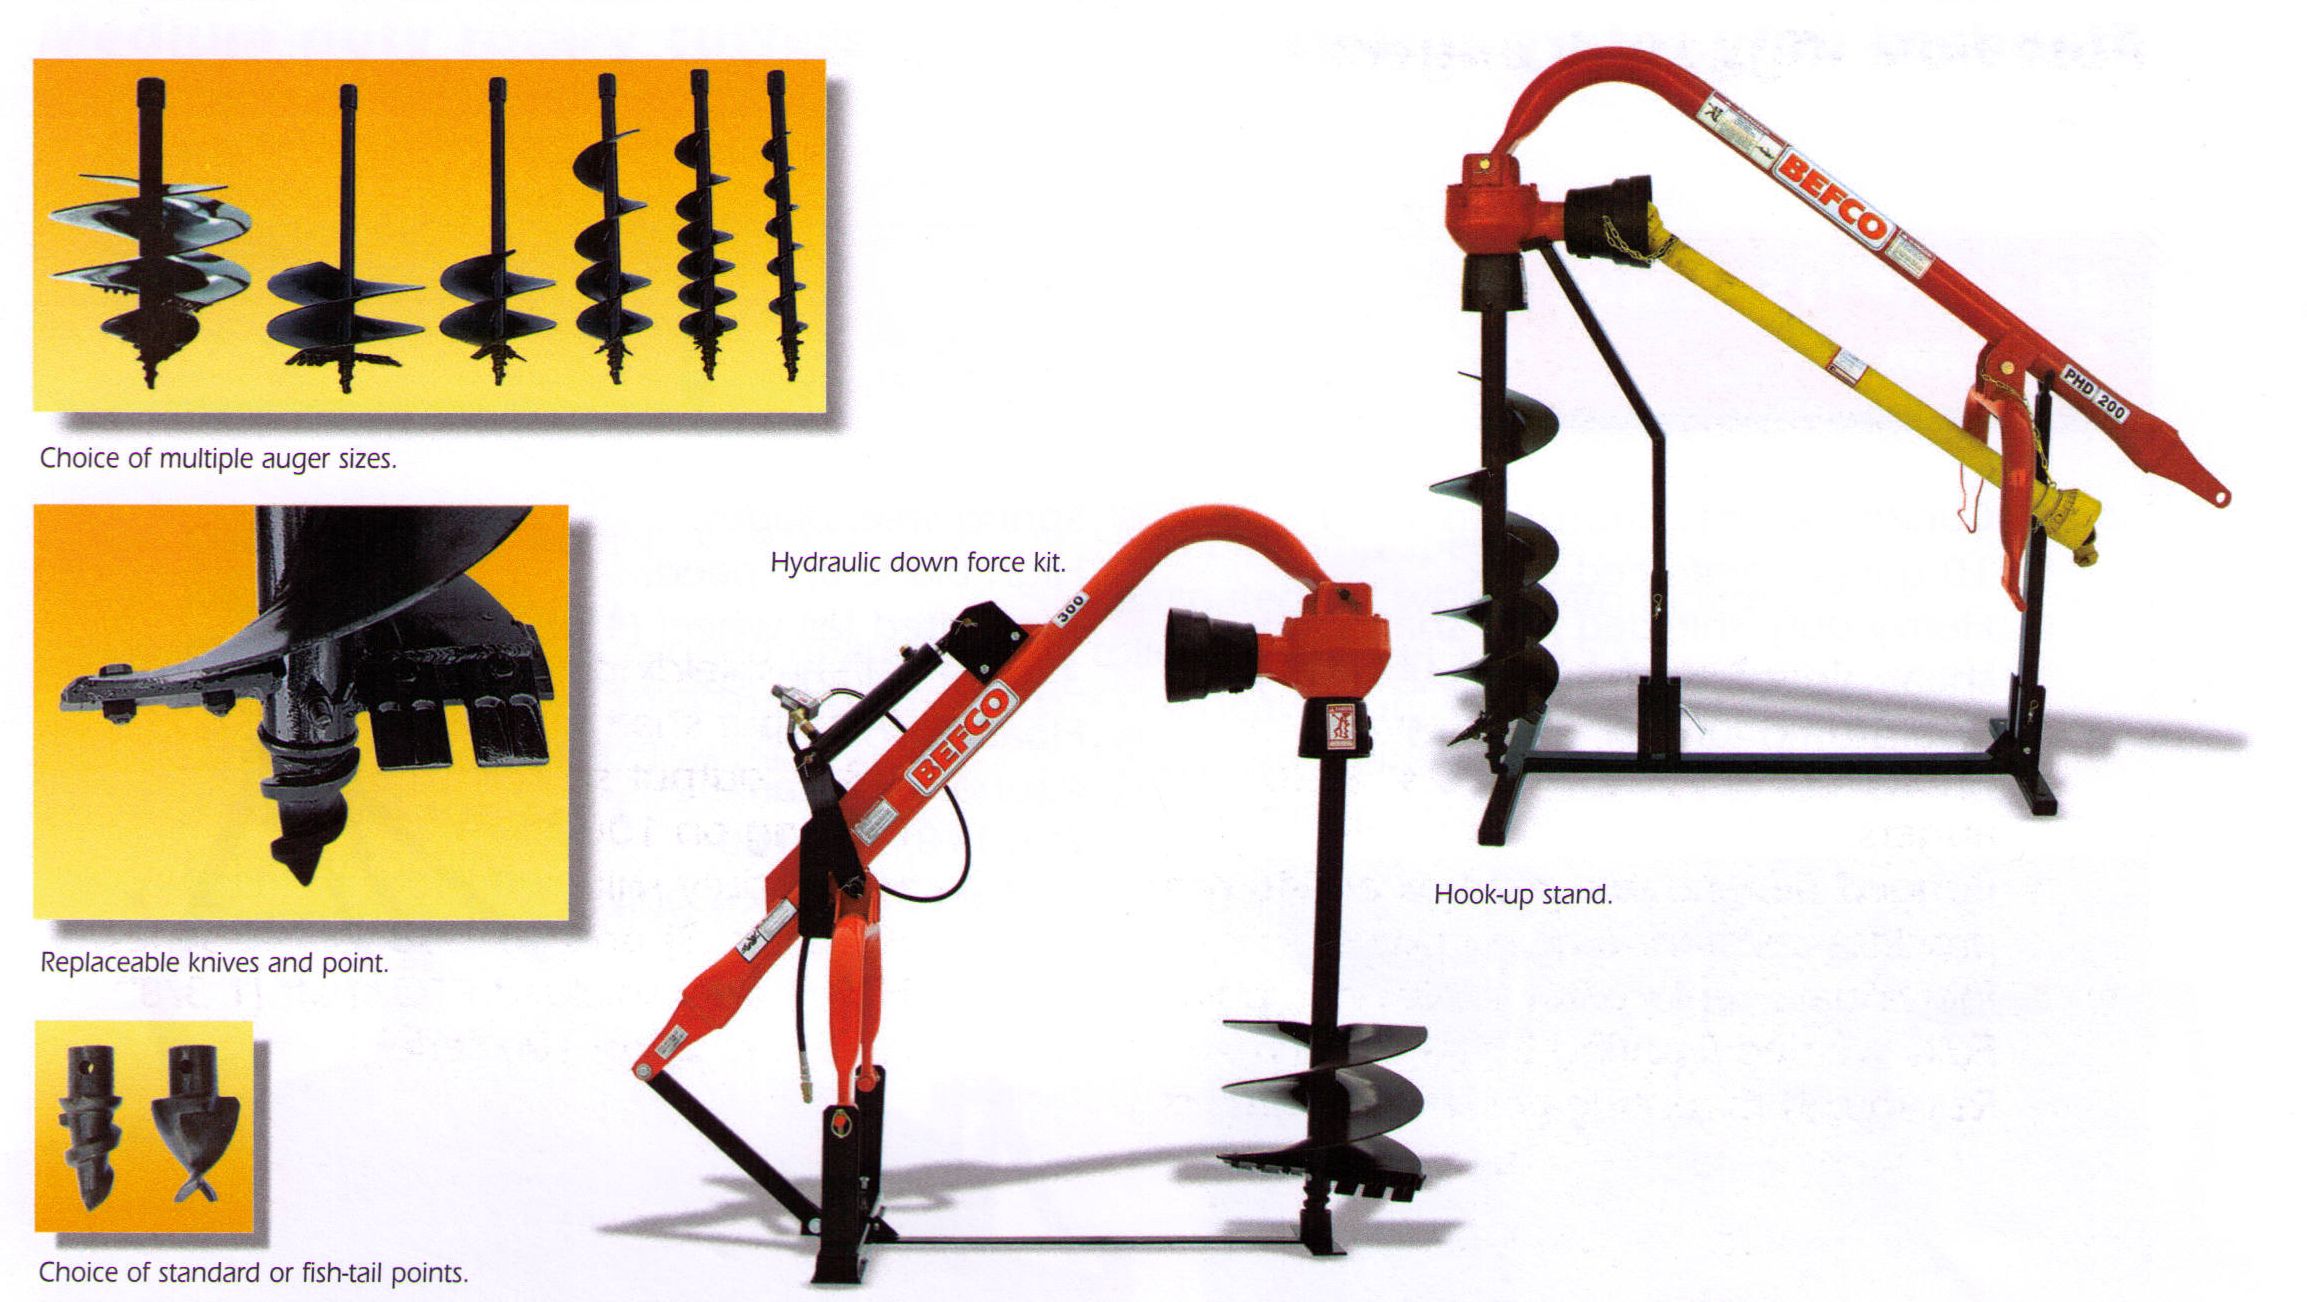 Augers, Down Force Kit, Storage And Hook-Up Stand